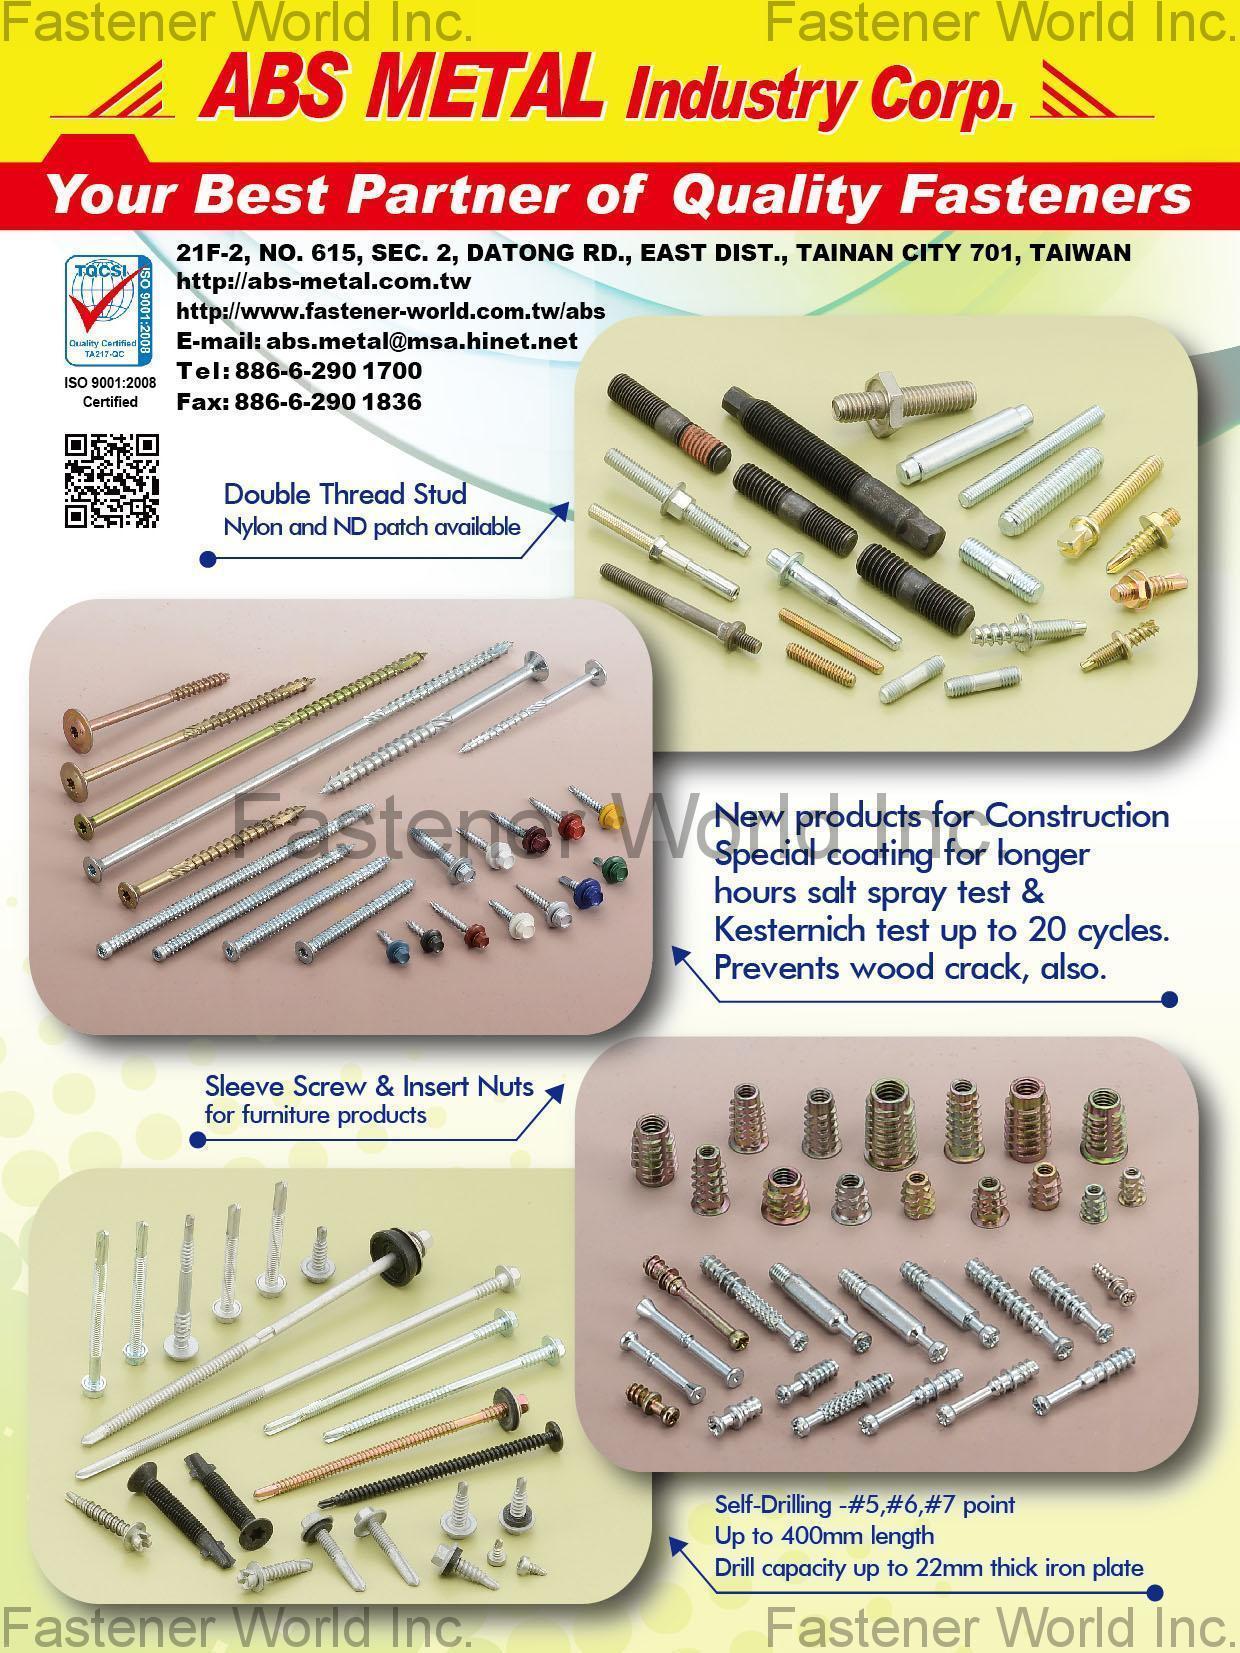 ABS METAL INDUSTRY CORP.  , Double Thread Stud, Roofing Screw, Self-Drilling Screws , Stud Bolts